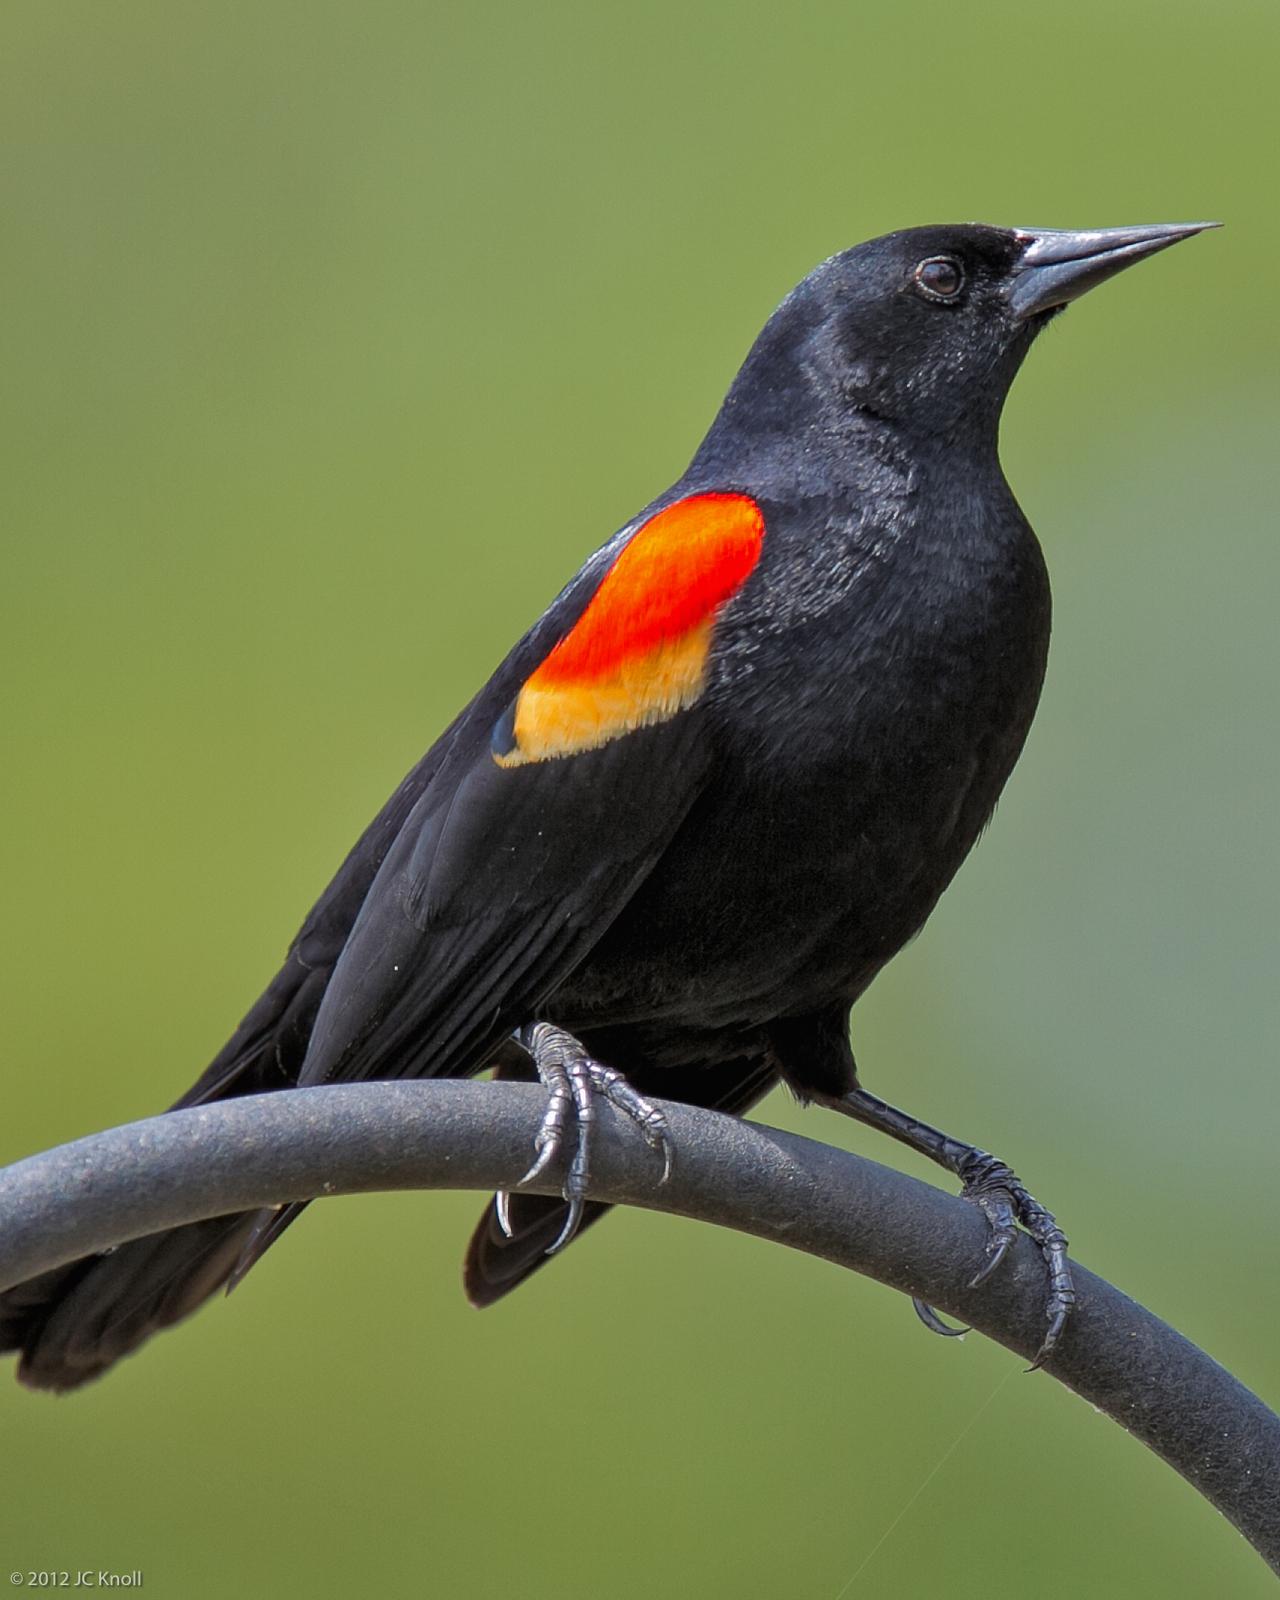 Red-winged Blackbird Photo by JC Knoll